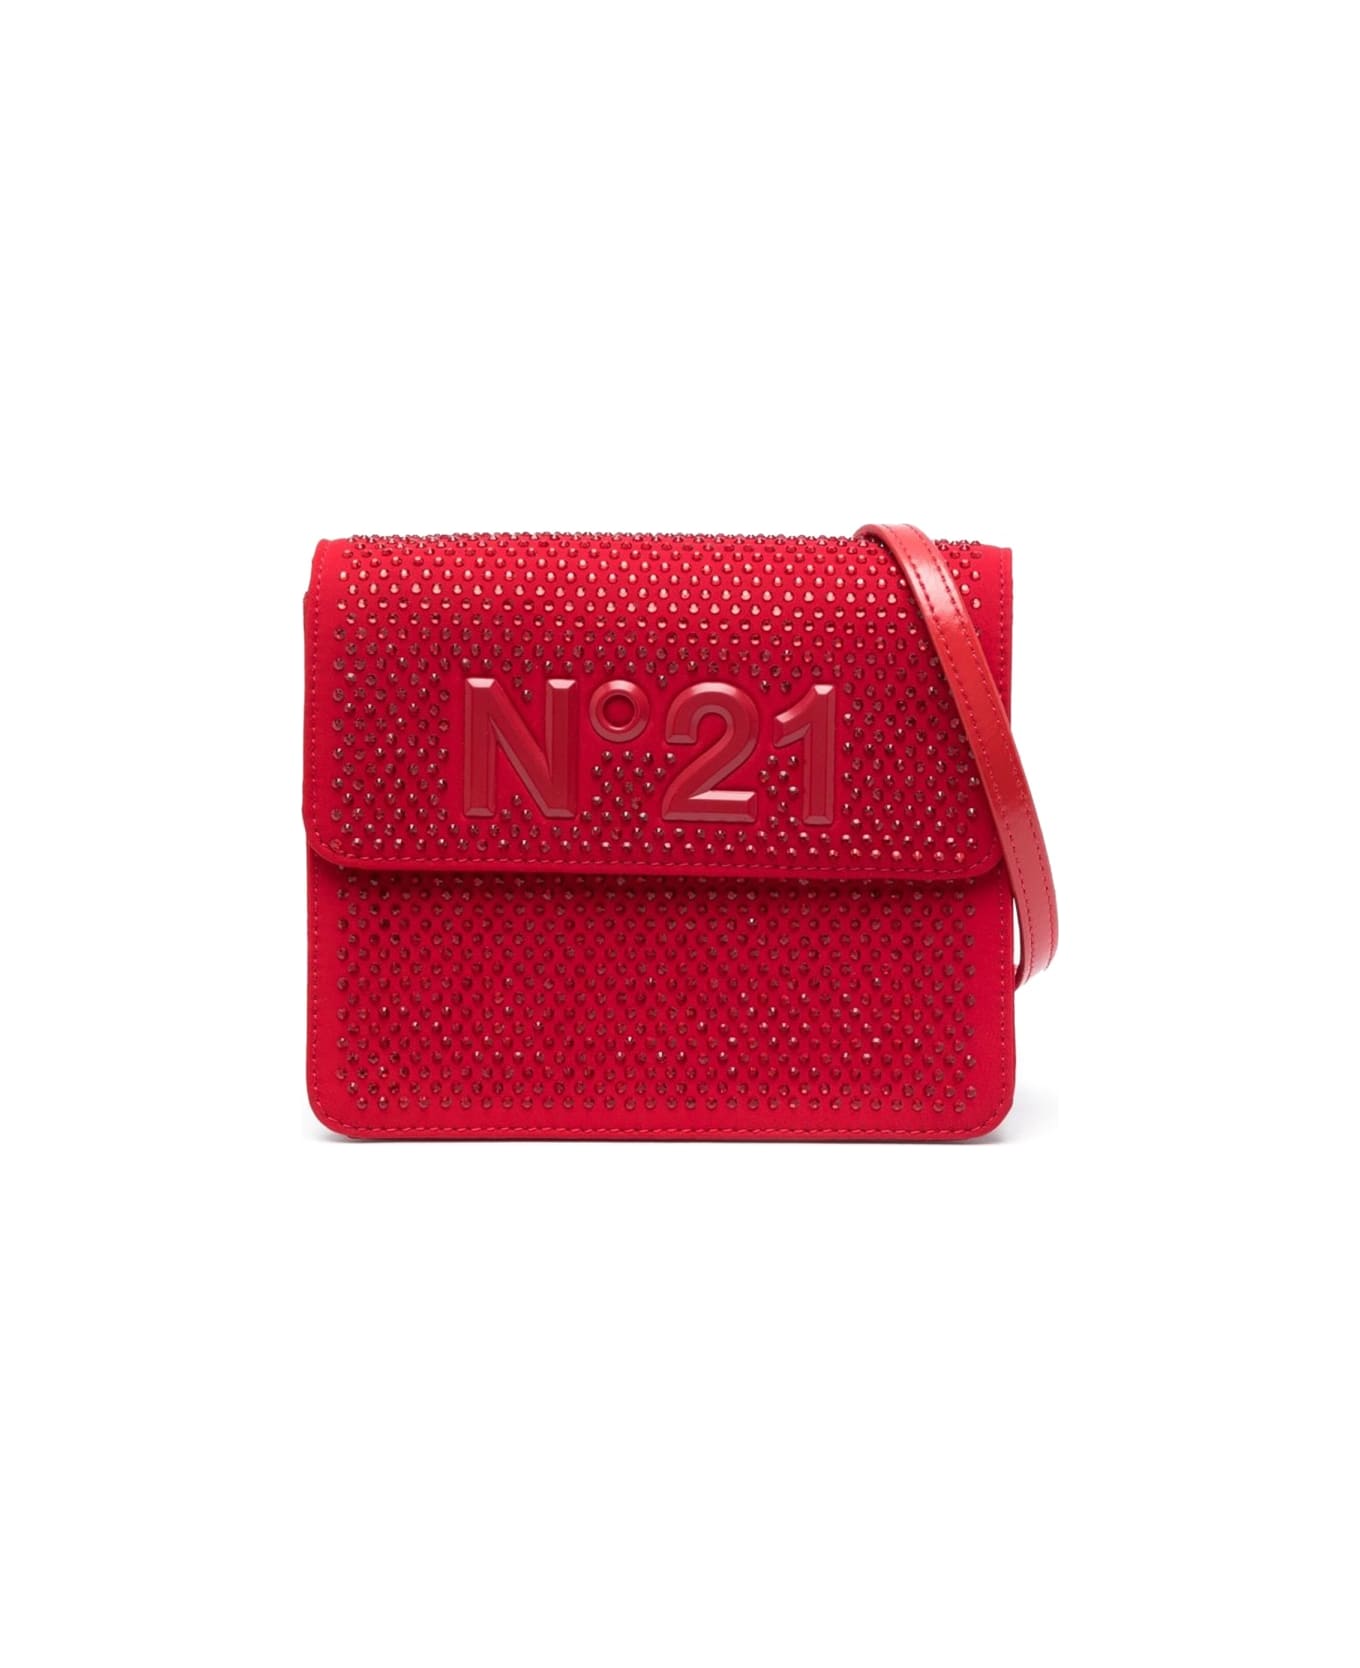 N.21 Pouch - RED アクセサリー＆ギフト